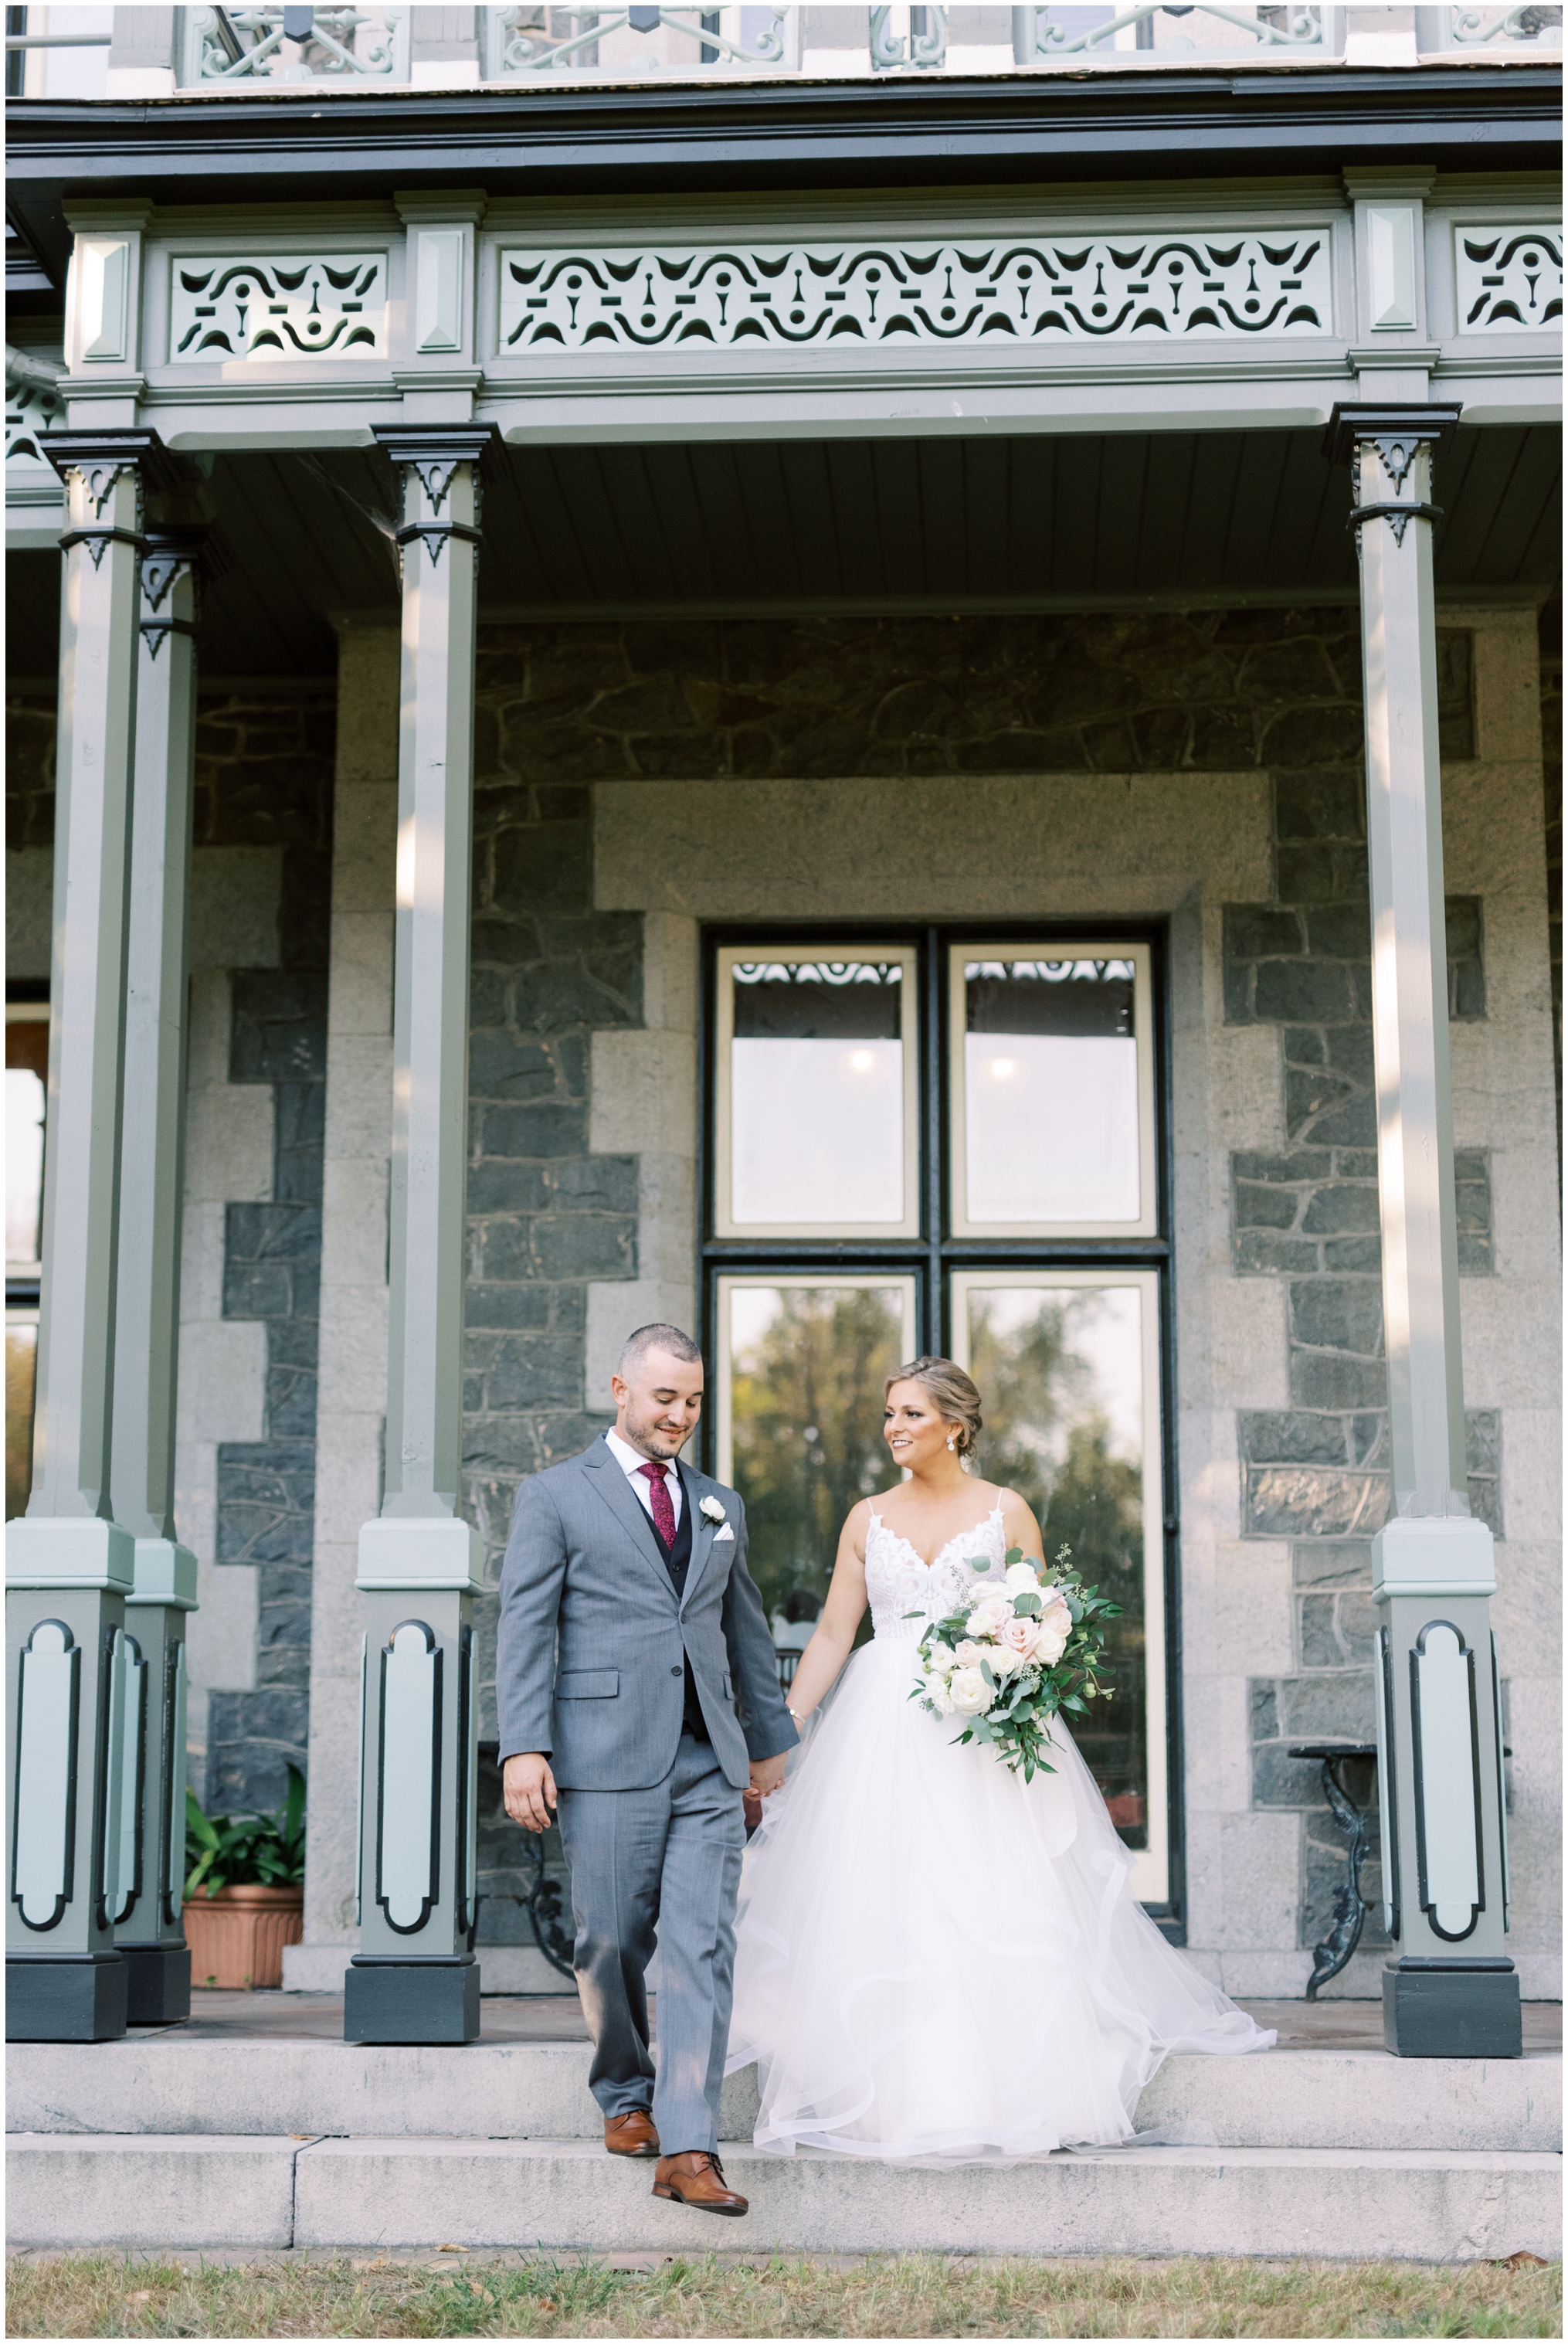 Wedding at The Carriage House at Rockwood Park